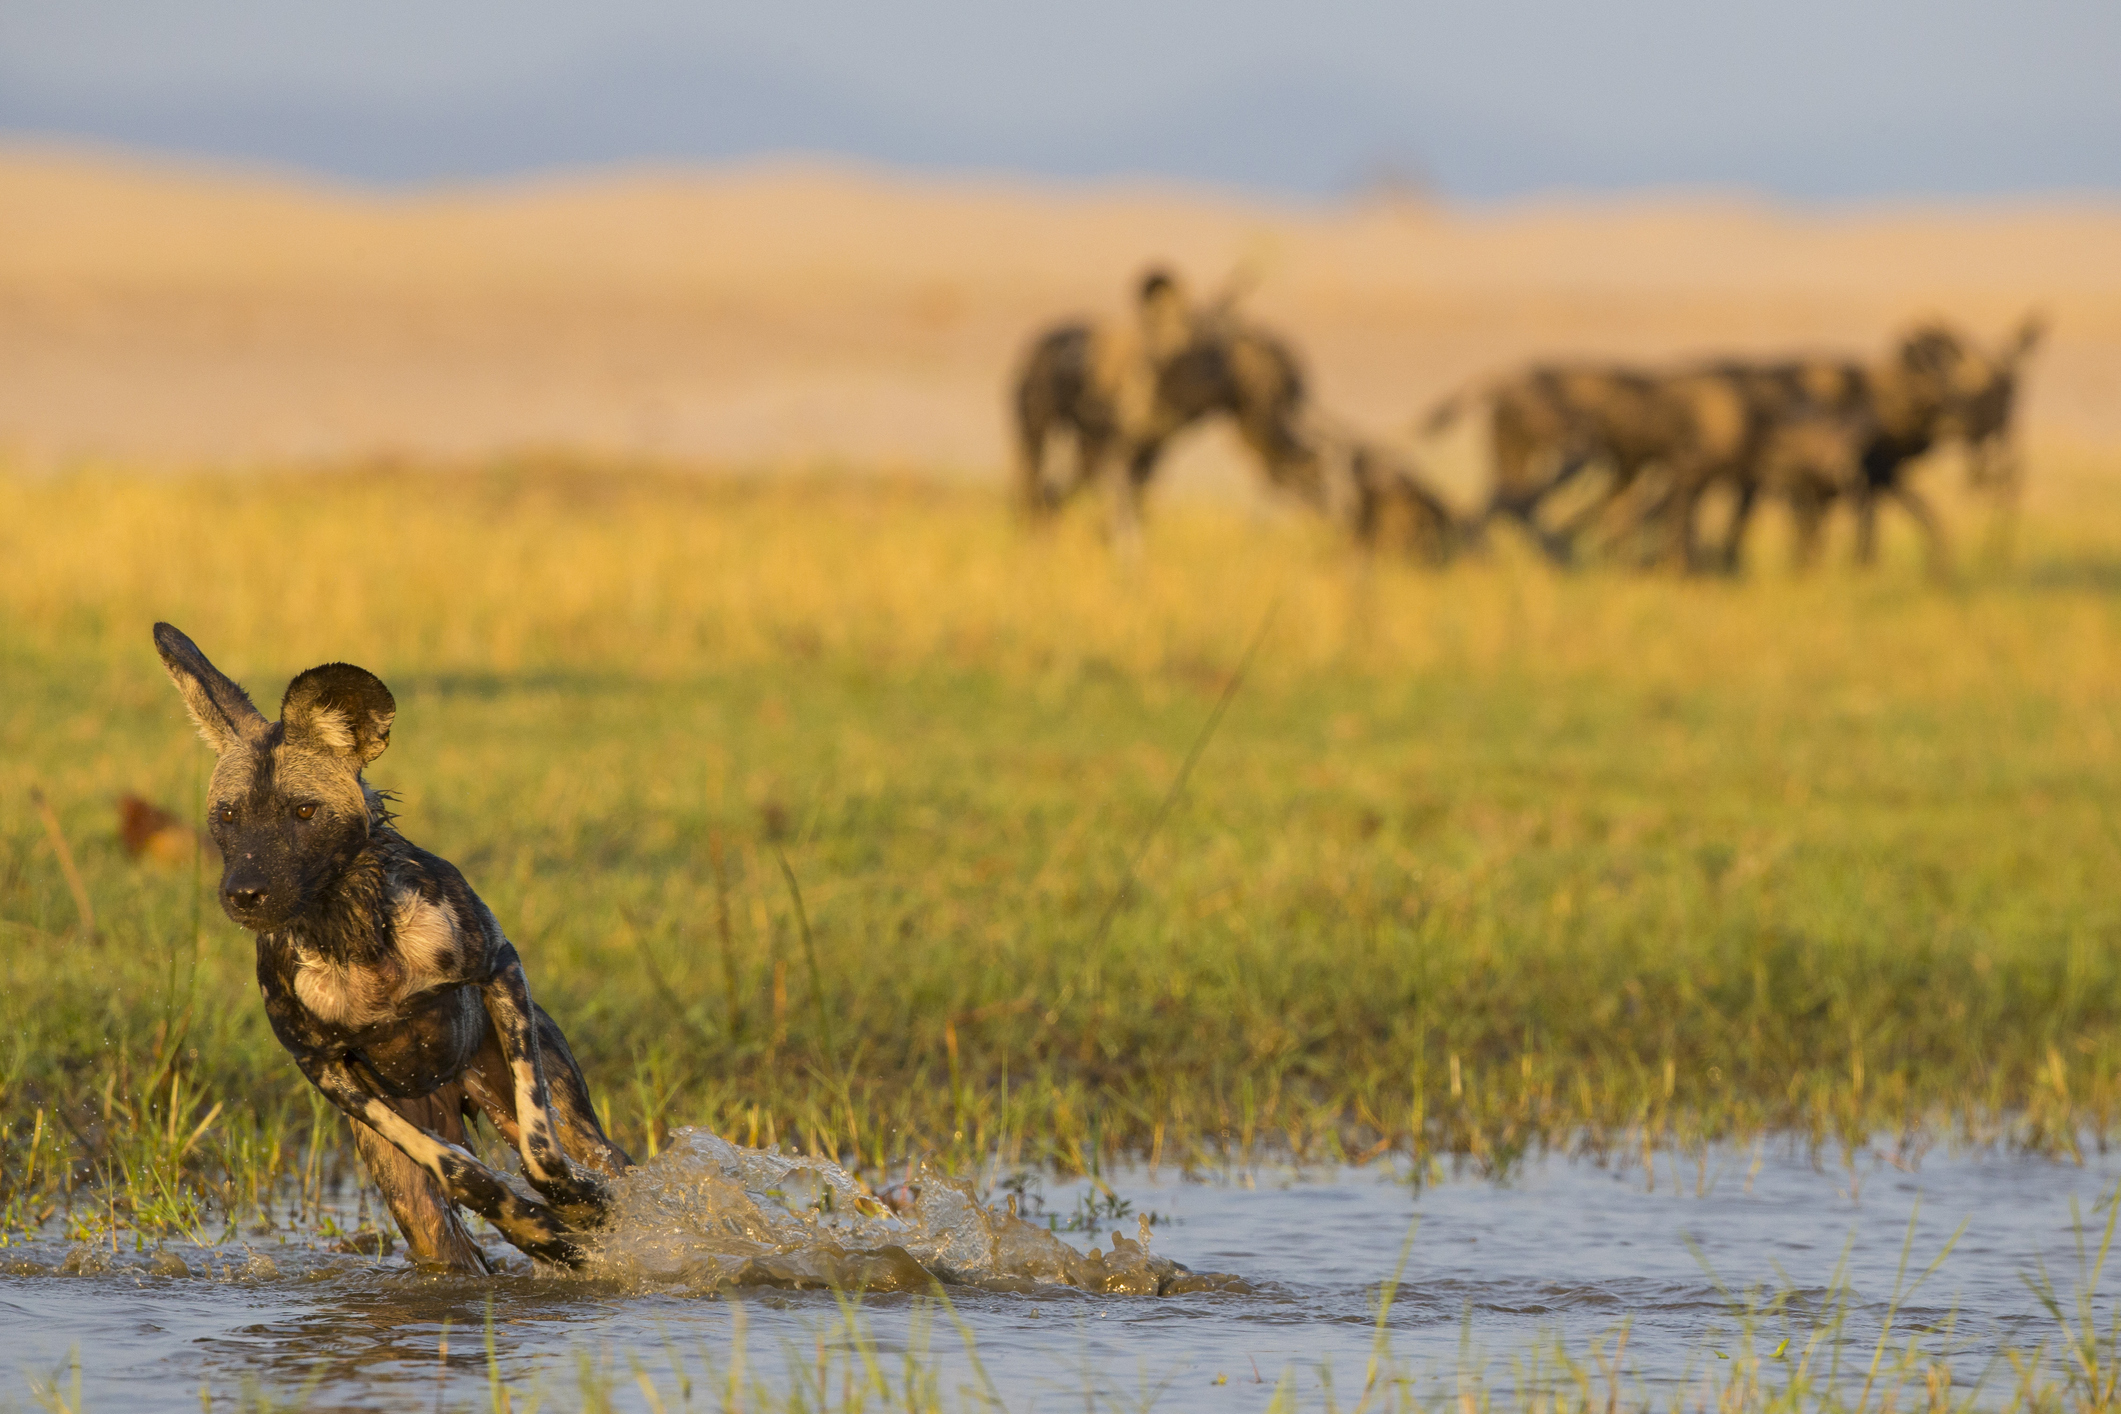 NU Borders' BITE Platform uses Advanced Analytics to Support Anti-Poaching in Southern Africa